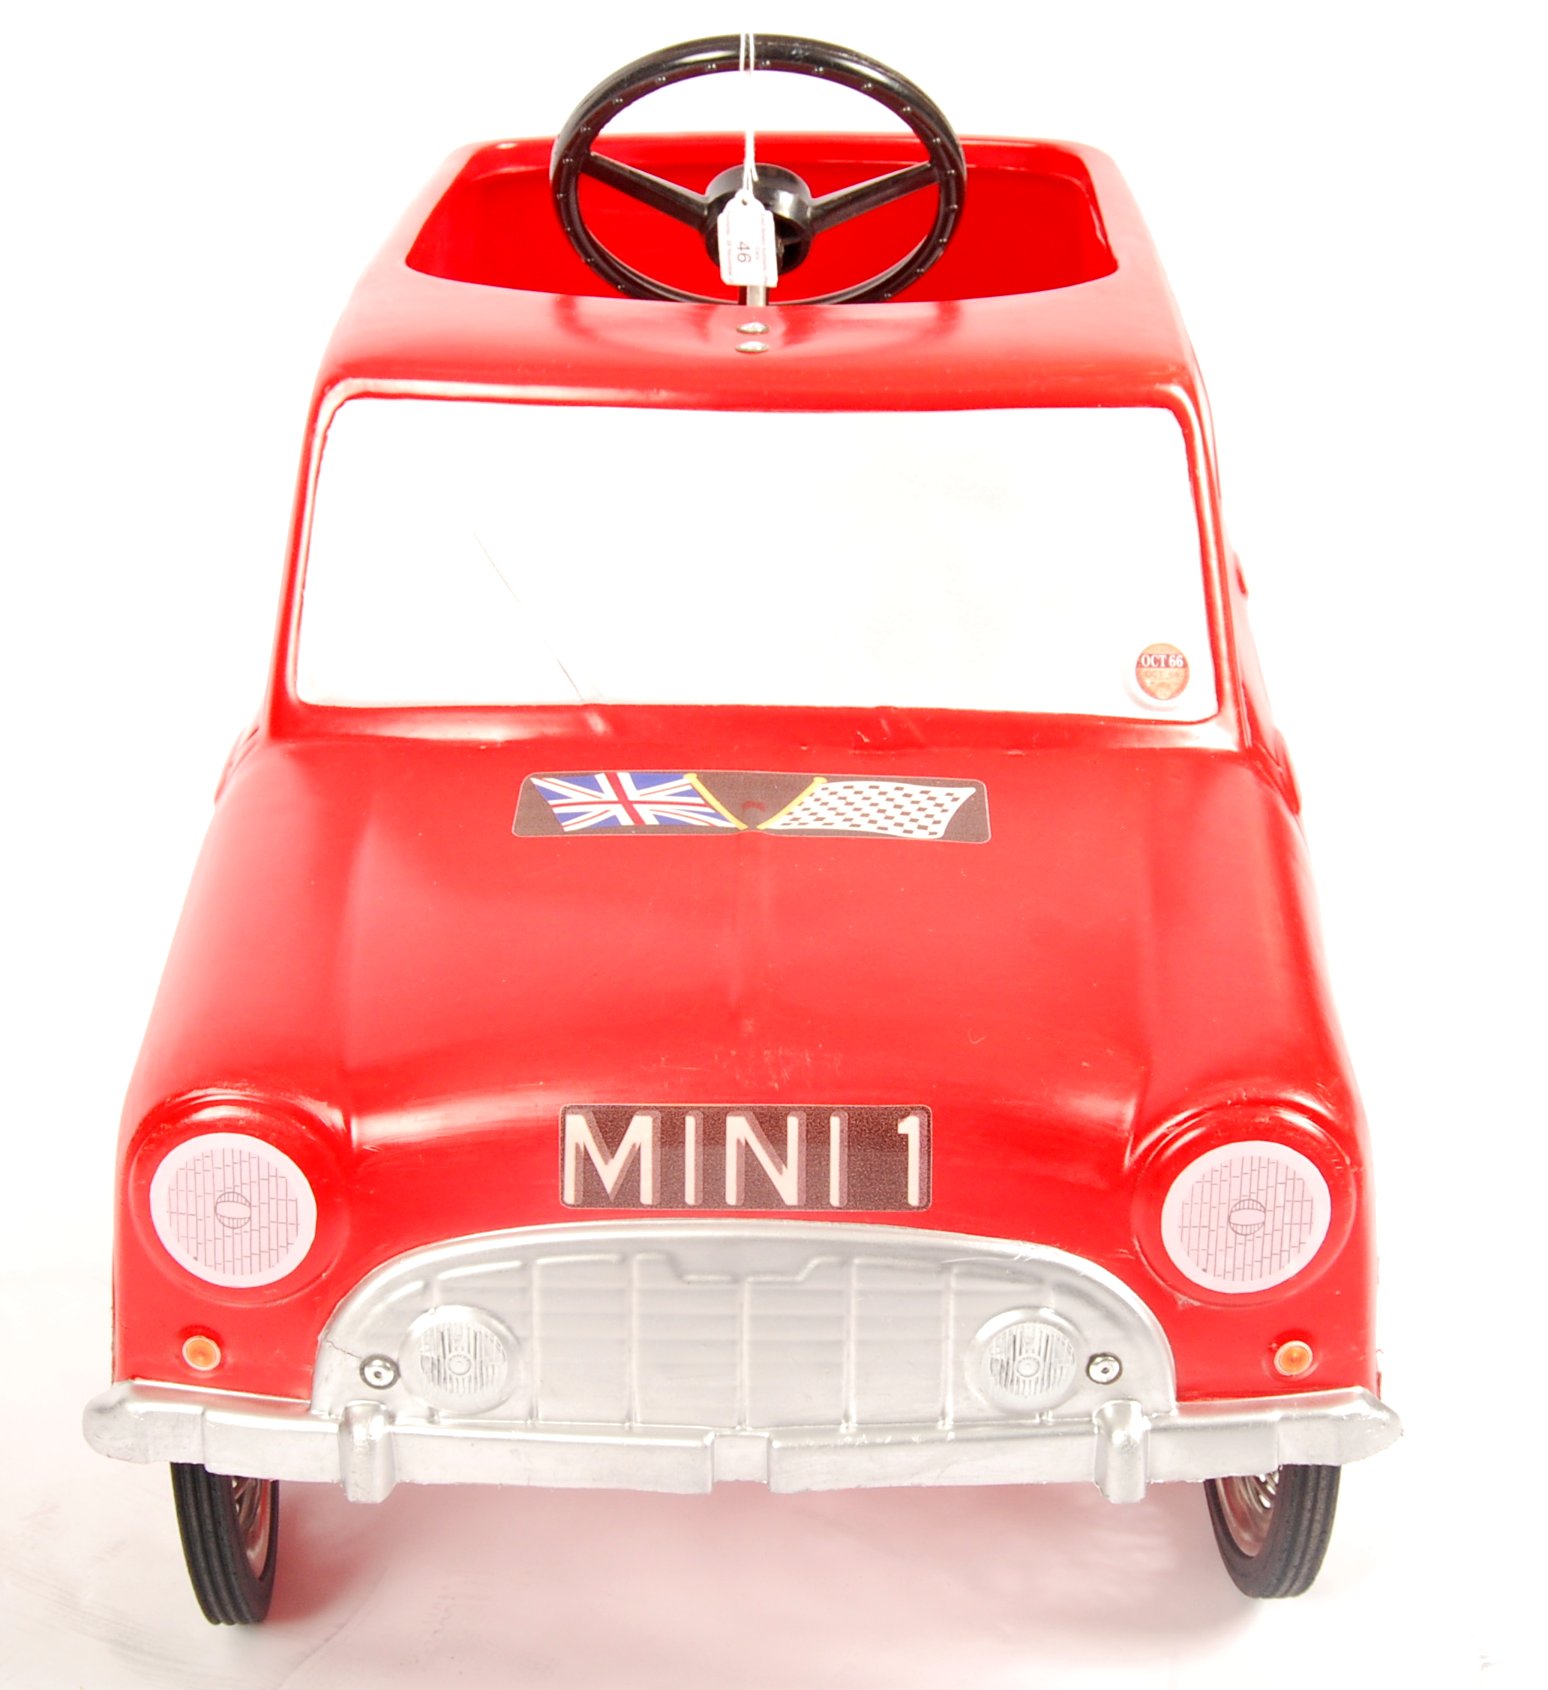 RARE 1960'S LEEWAY MINI CHILD'S PEDAL CAR IN RED - Image 3 of 6